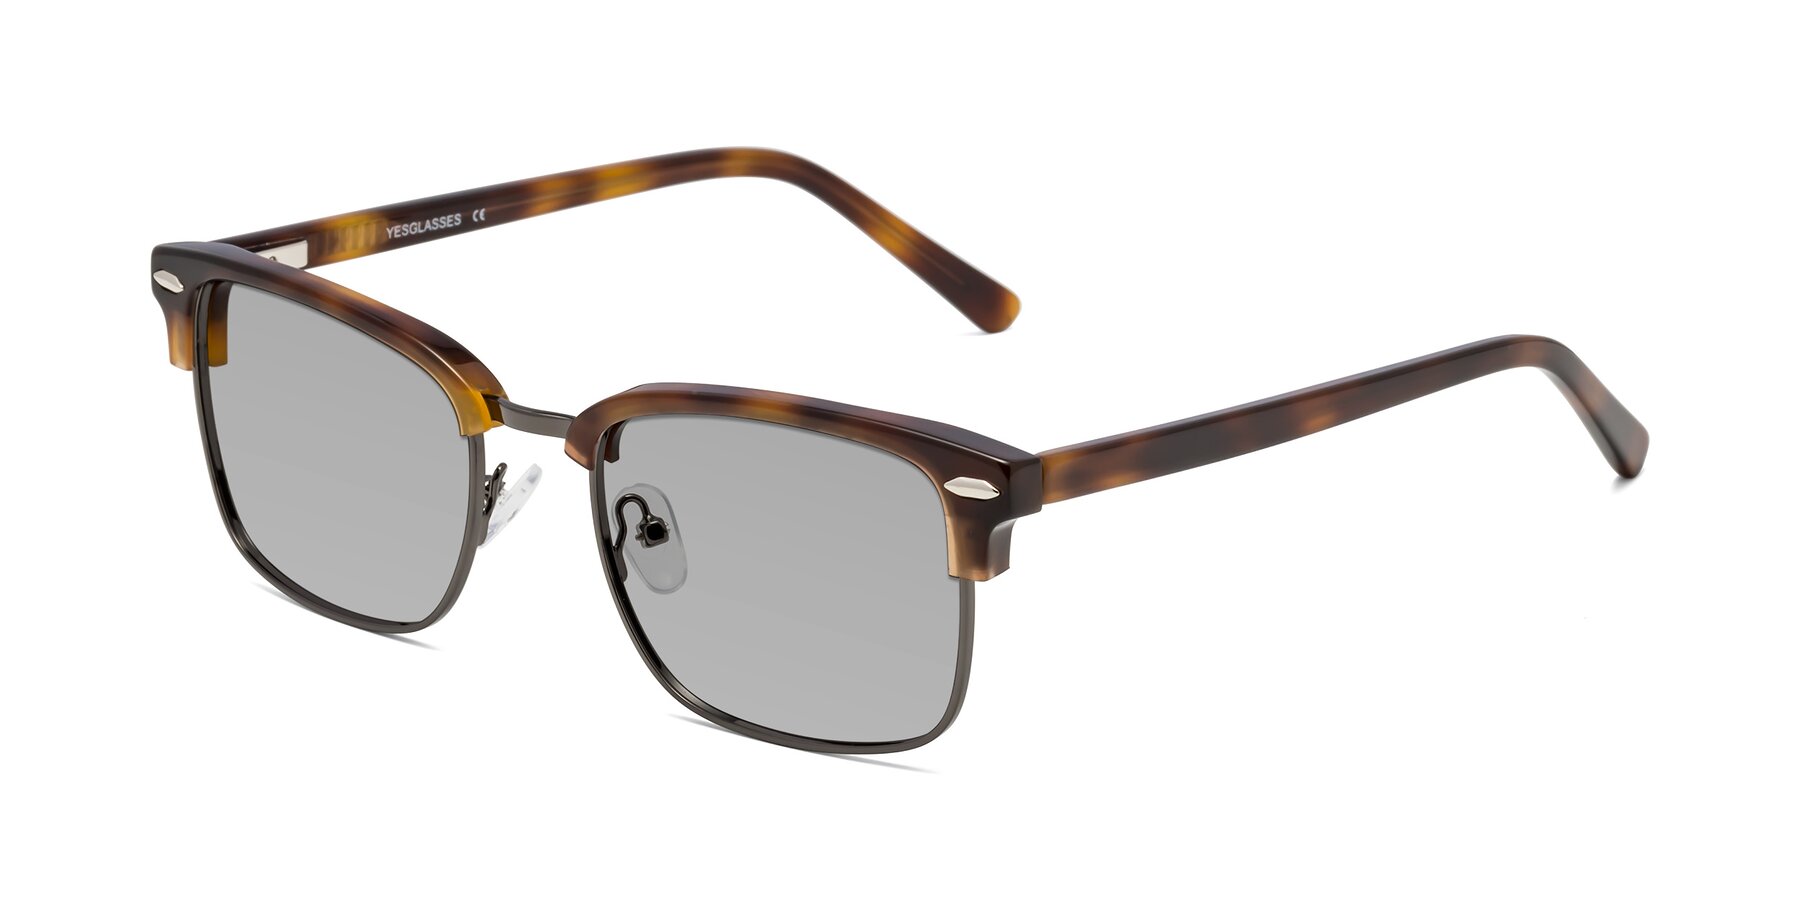 Angle of 17464 in Tortoise/ Gunmetal with Light Gray Tinted Lenses